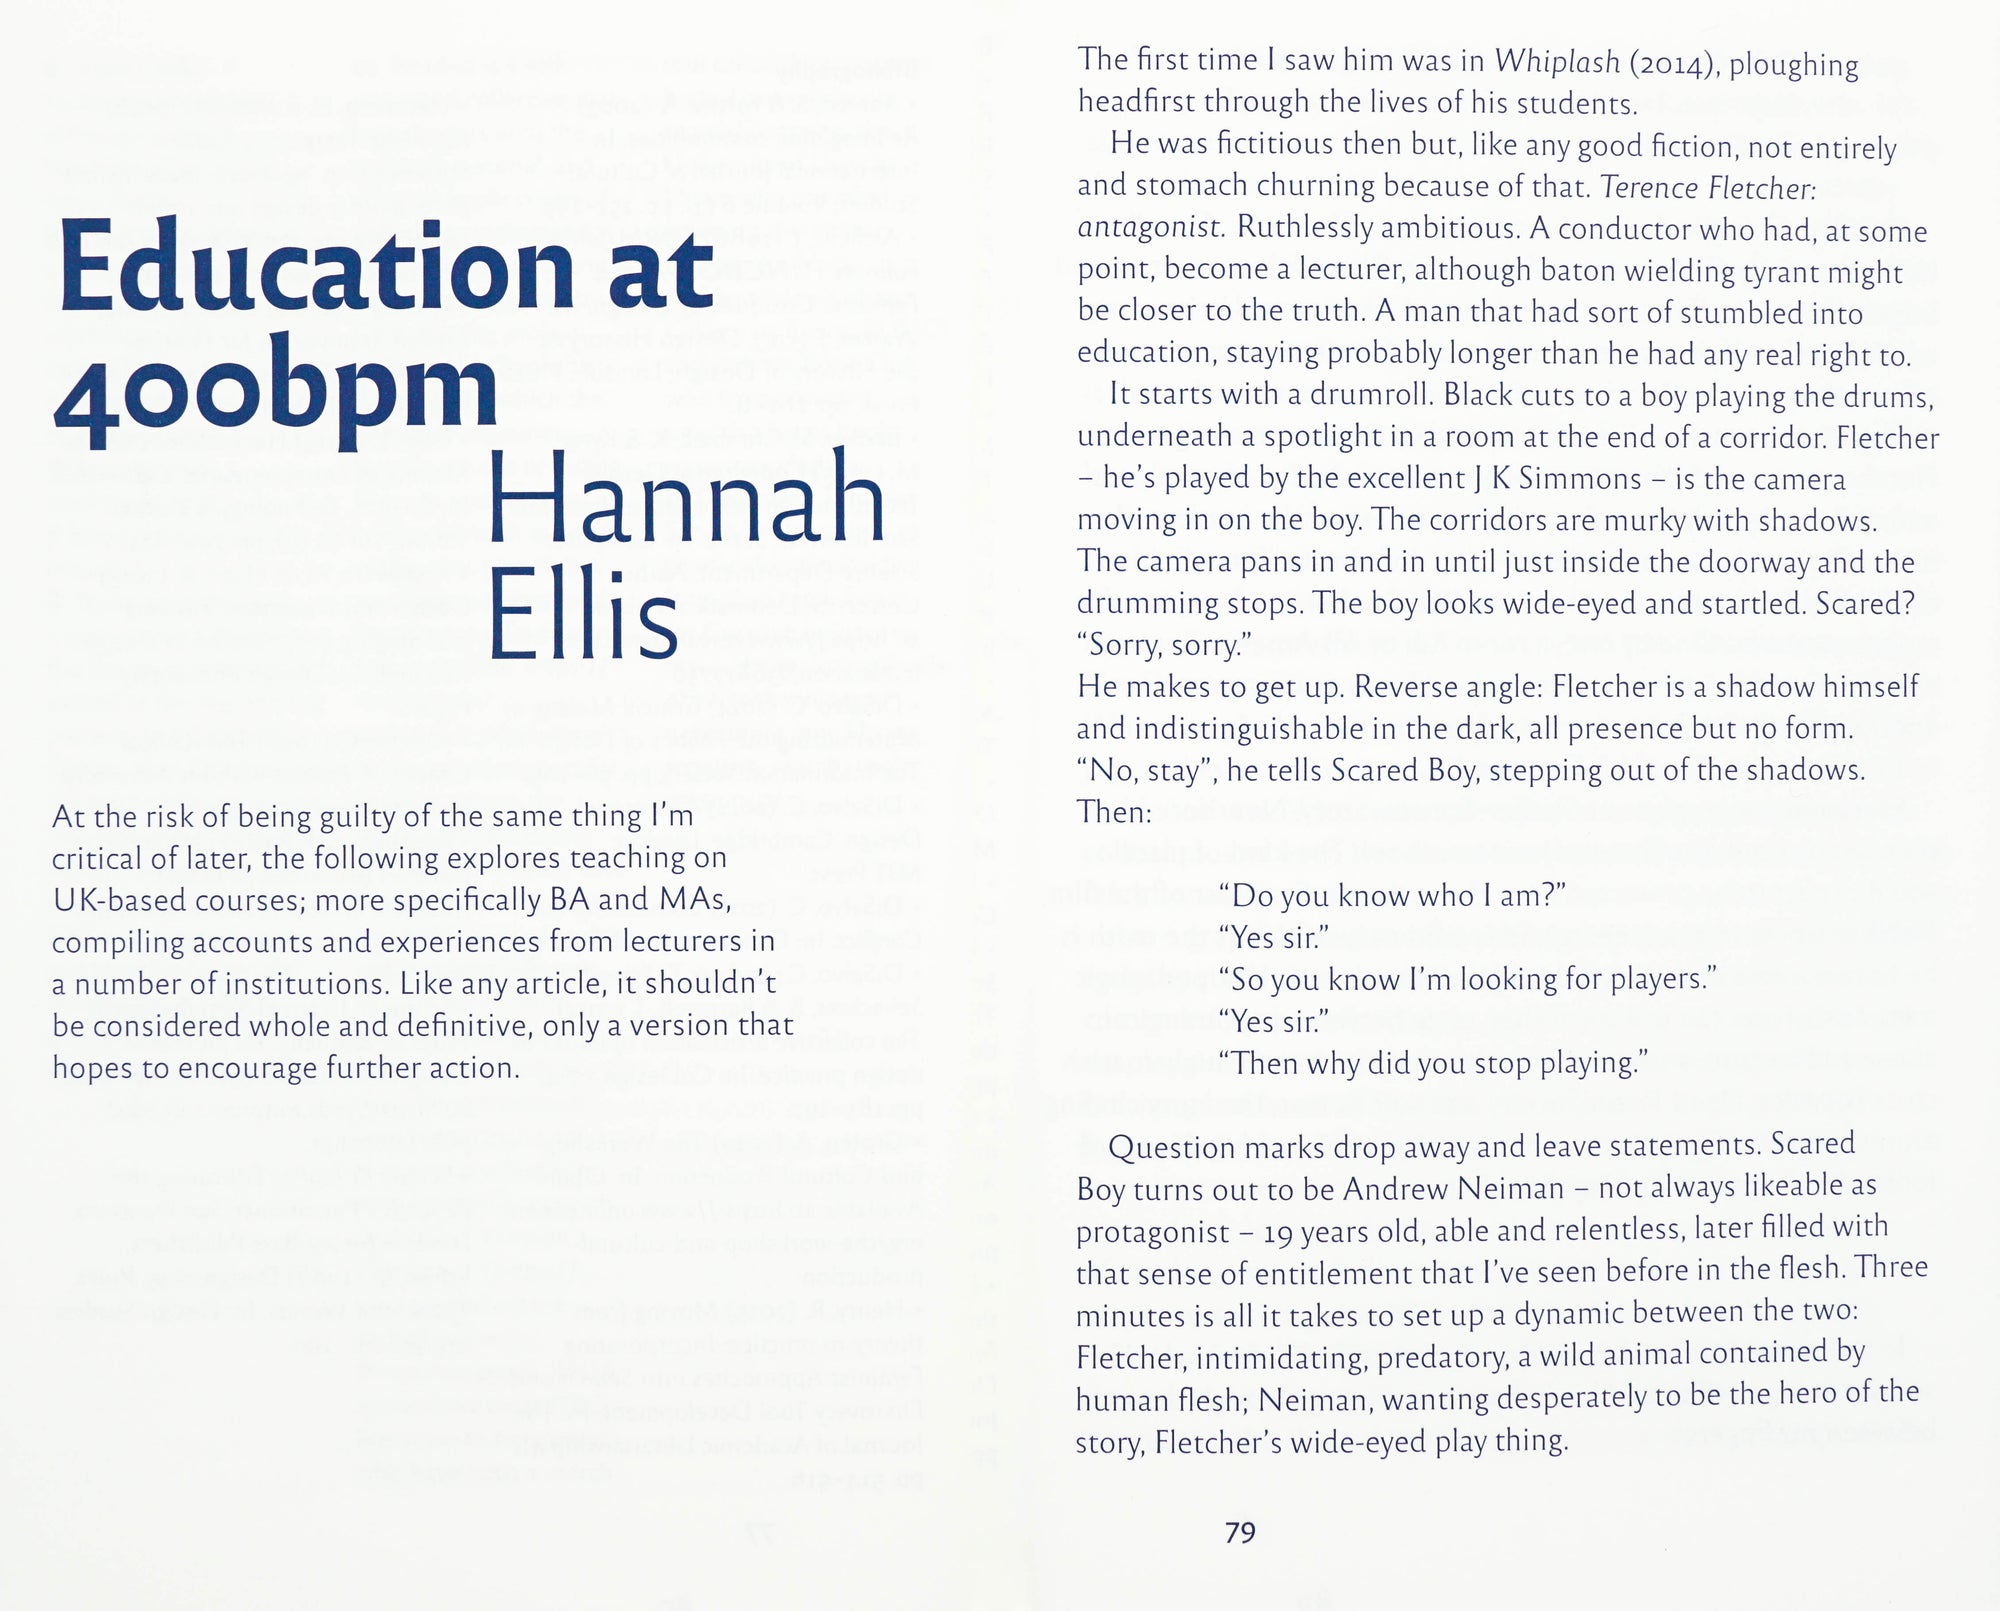 Book spread with white background and blue writing. On the left it says in large font Education at 400bpm Hannah Ellis and a small column of text follows. The right page is fully covered in text.